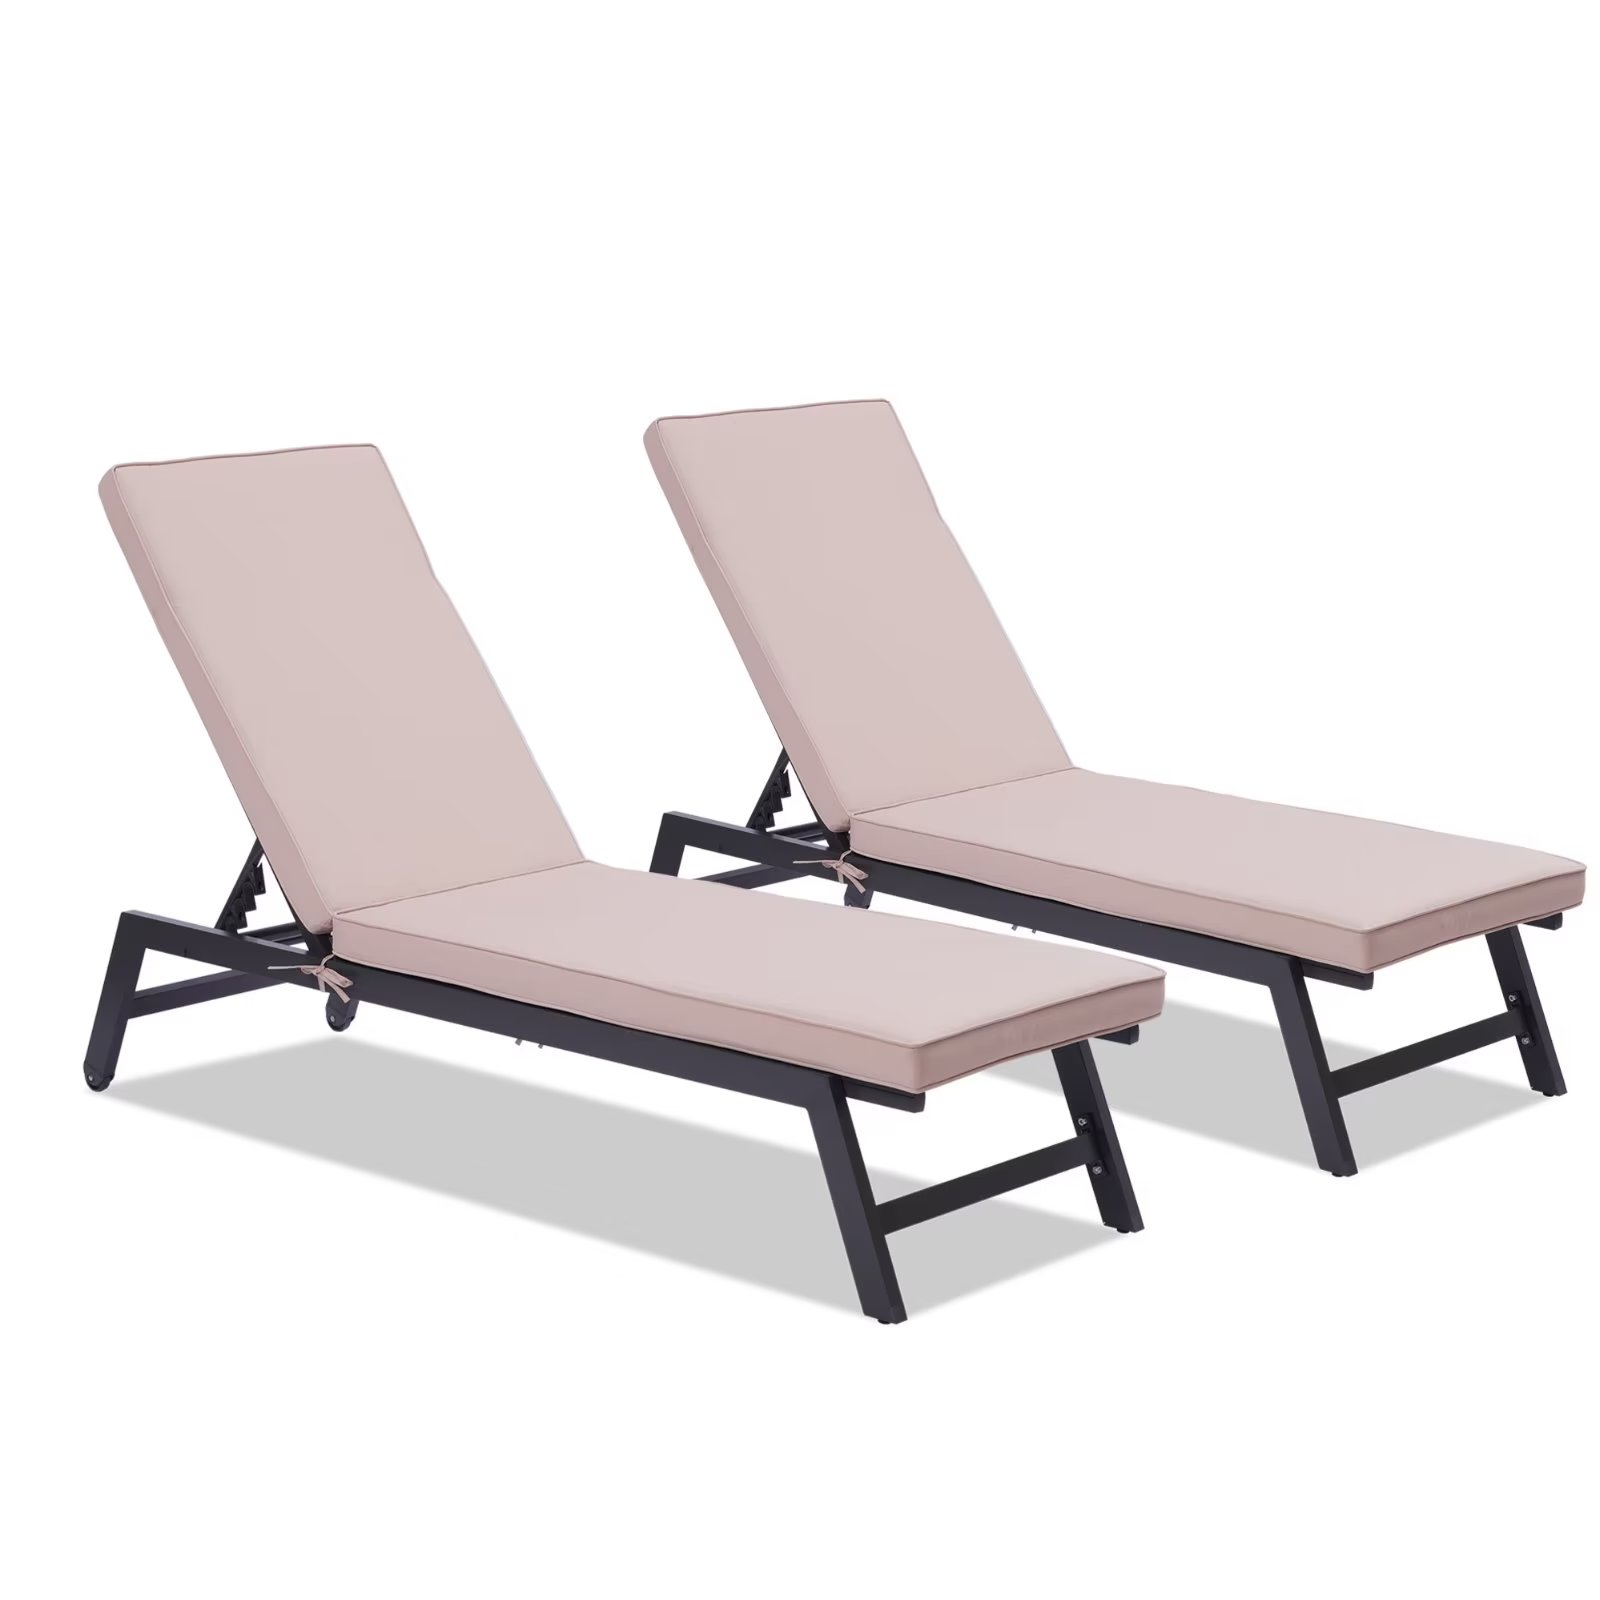 2 Pieces Patio Lounge Chair Set, Patio Chaise Lounges with Thickened Cushion, All Weather Adjustable Lounge Chair Set for Patio Backyard Porch Garden Poolside, Khaki - image 1 of 7